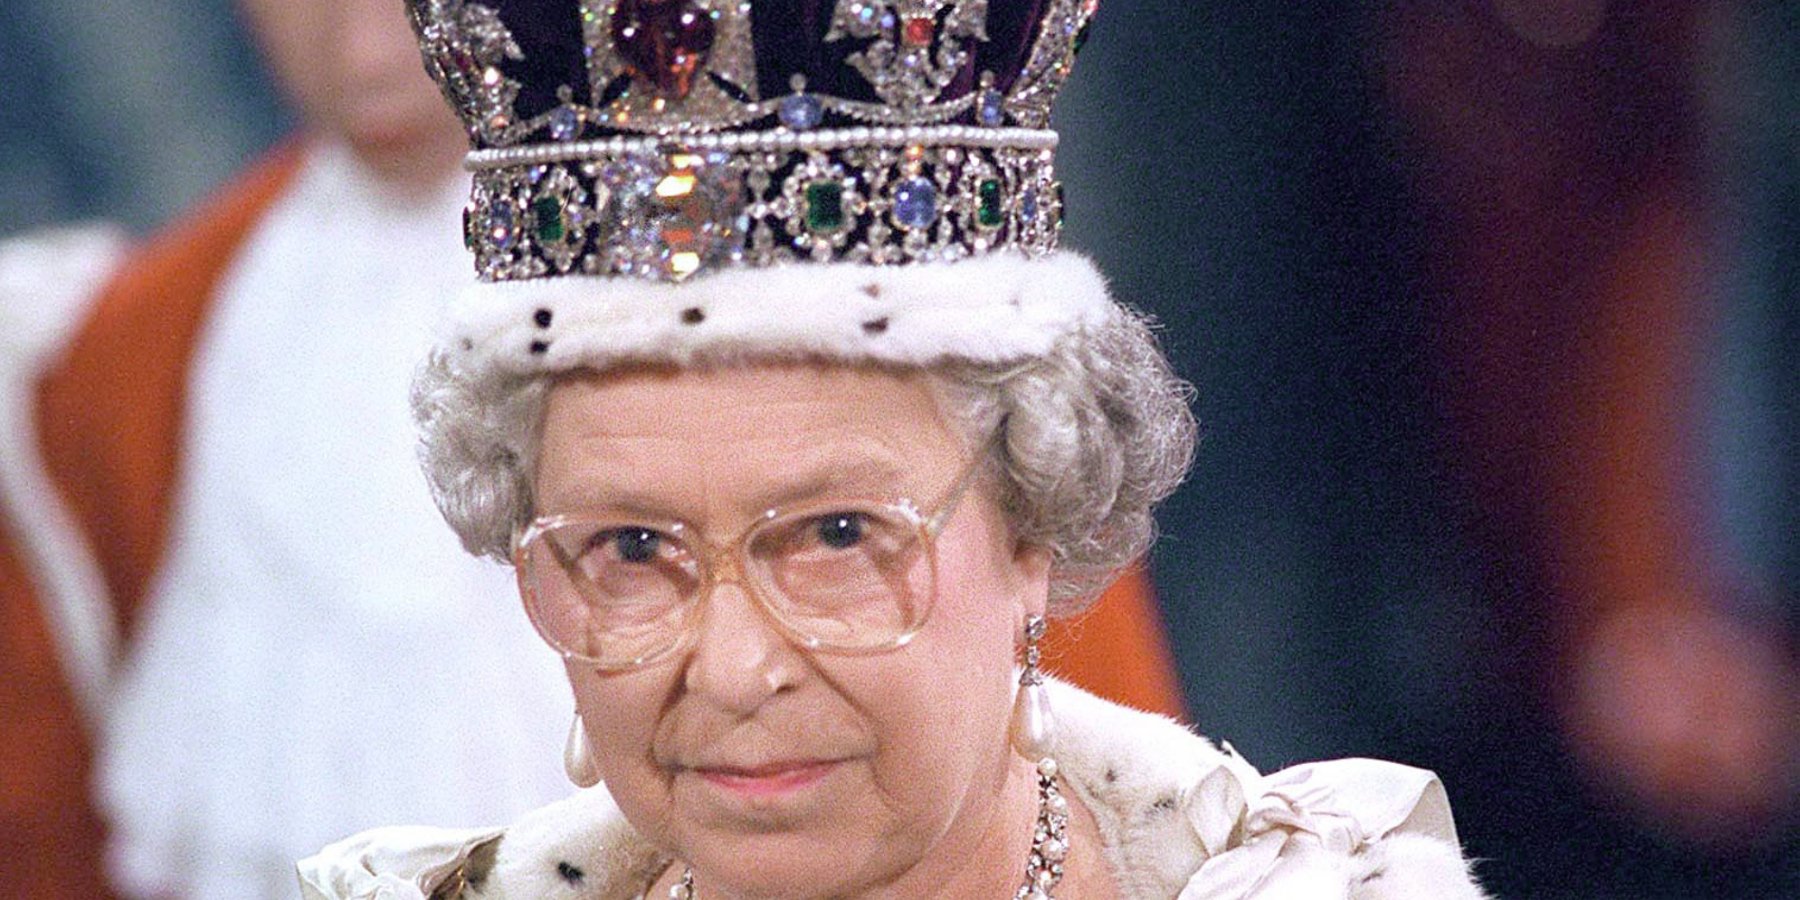 Queen Elizabeth wearing the Imperial State Crown at the opening of parliament in 1995.